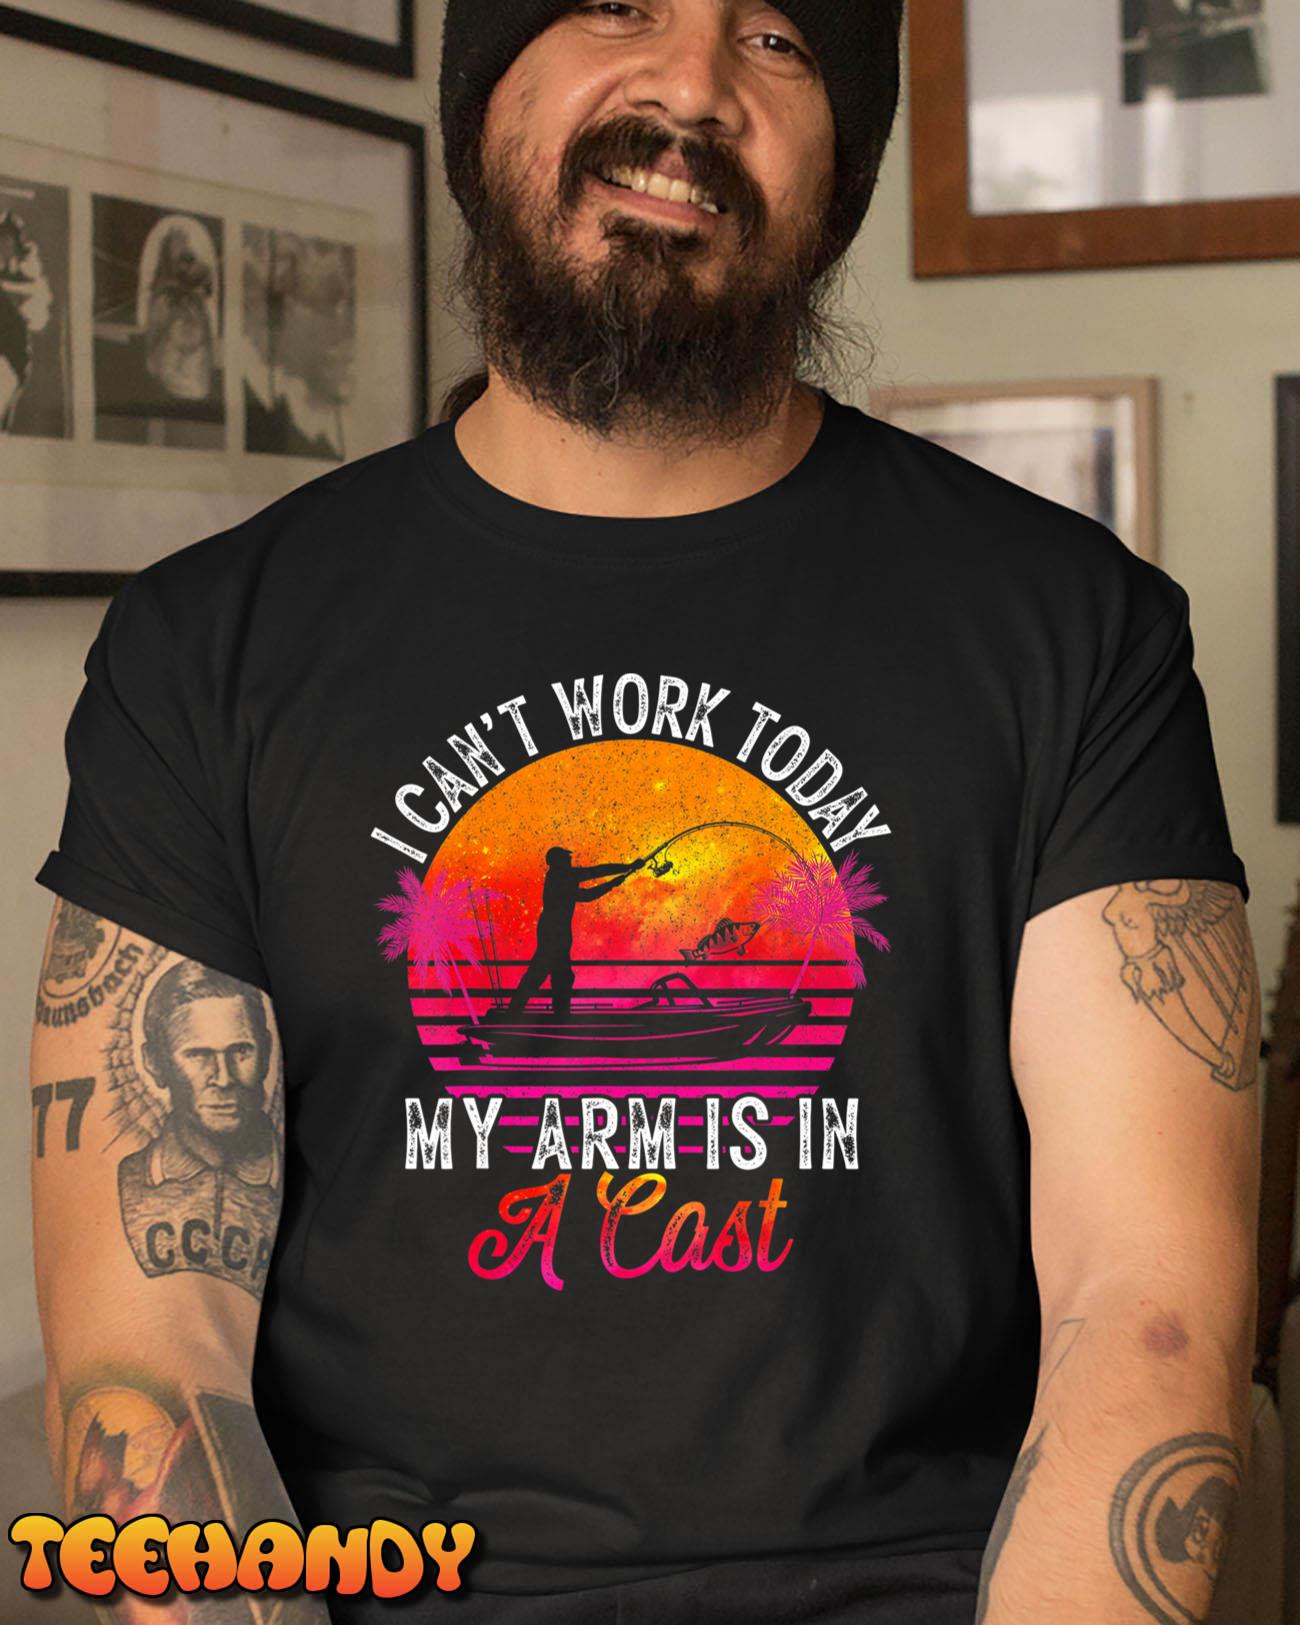 Fisherman I Can’t Work Today My Arm Is in Cast Funny Fishing T-Shirt